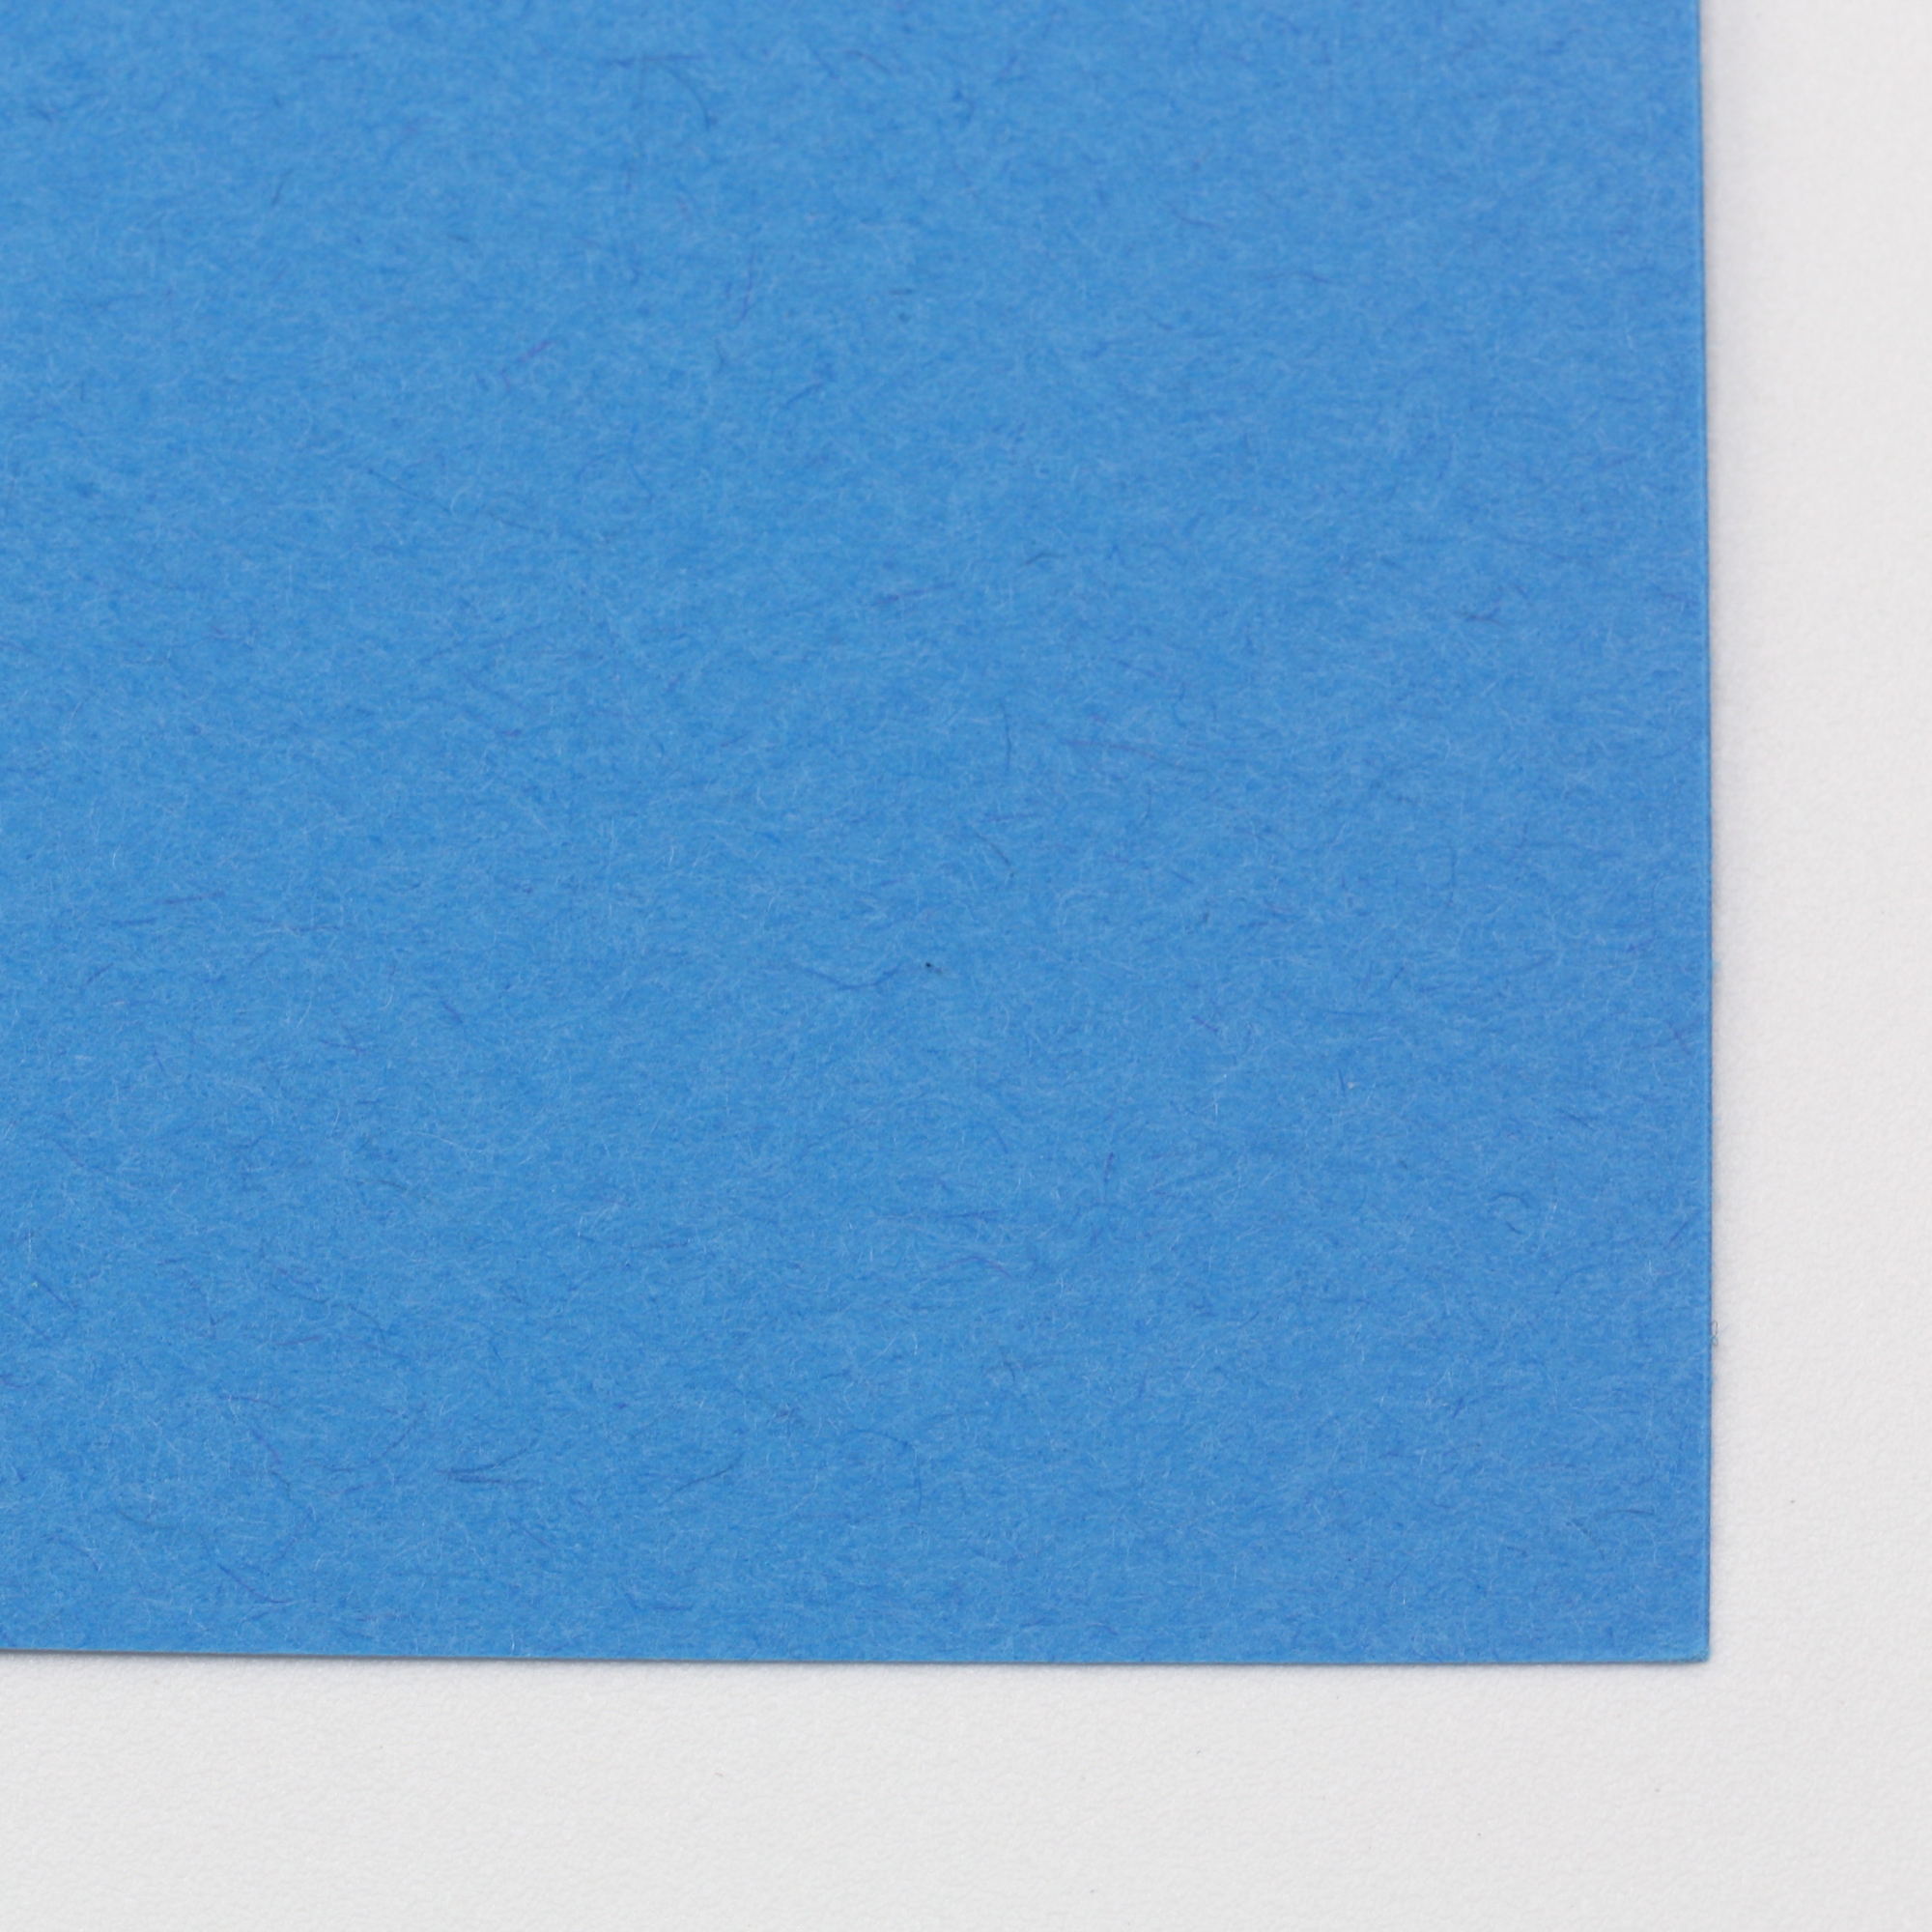 Astro Astrobrights Paper, 8.5 x 11, Lunar blue - 500 sheets